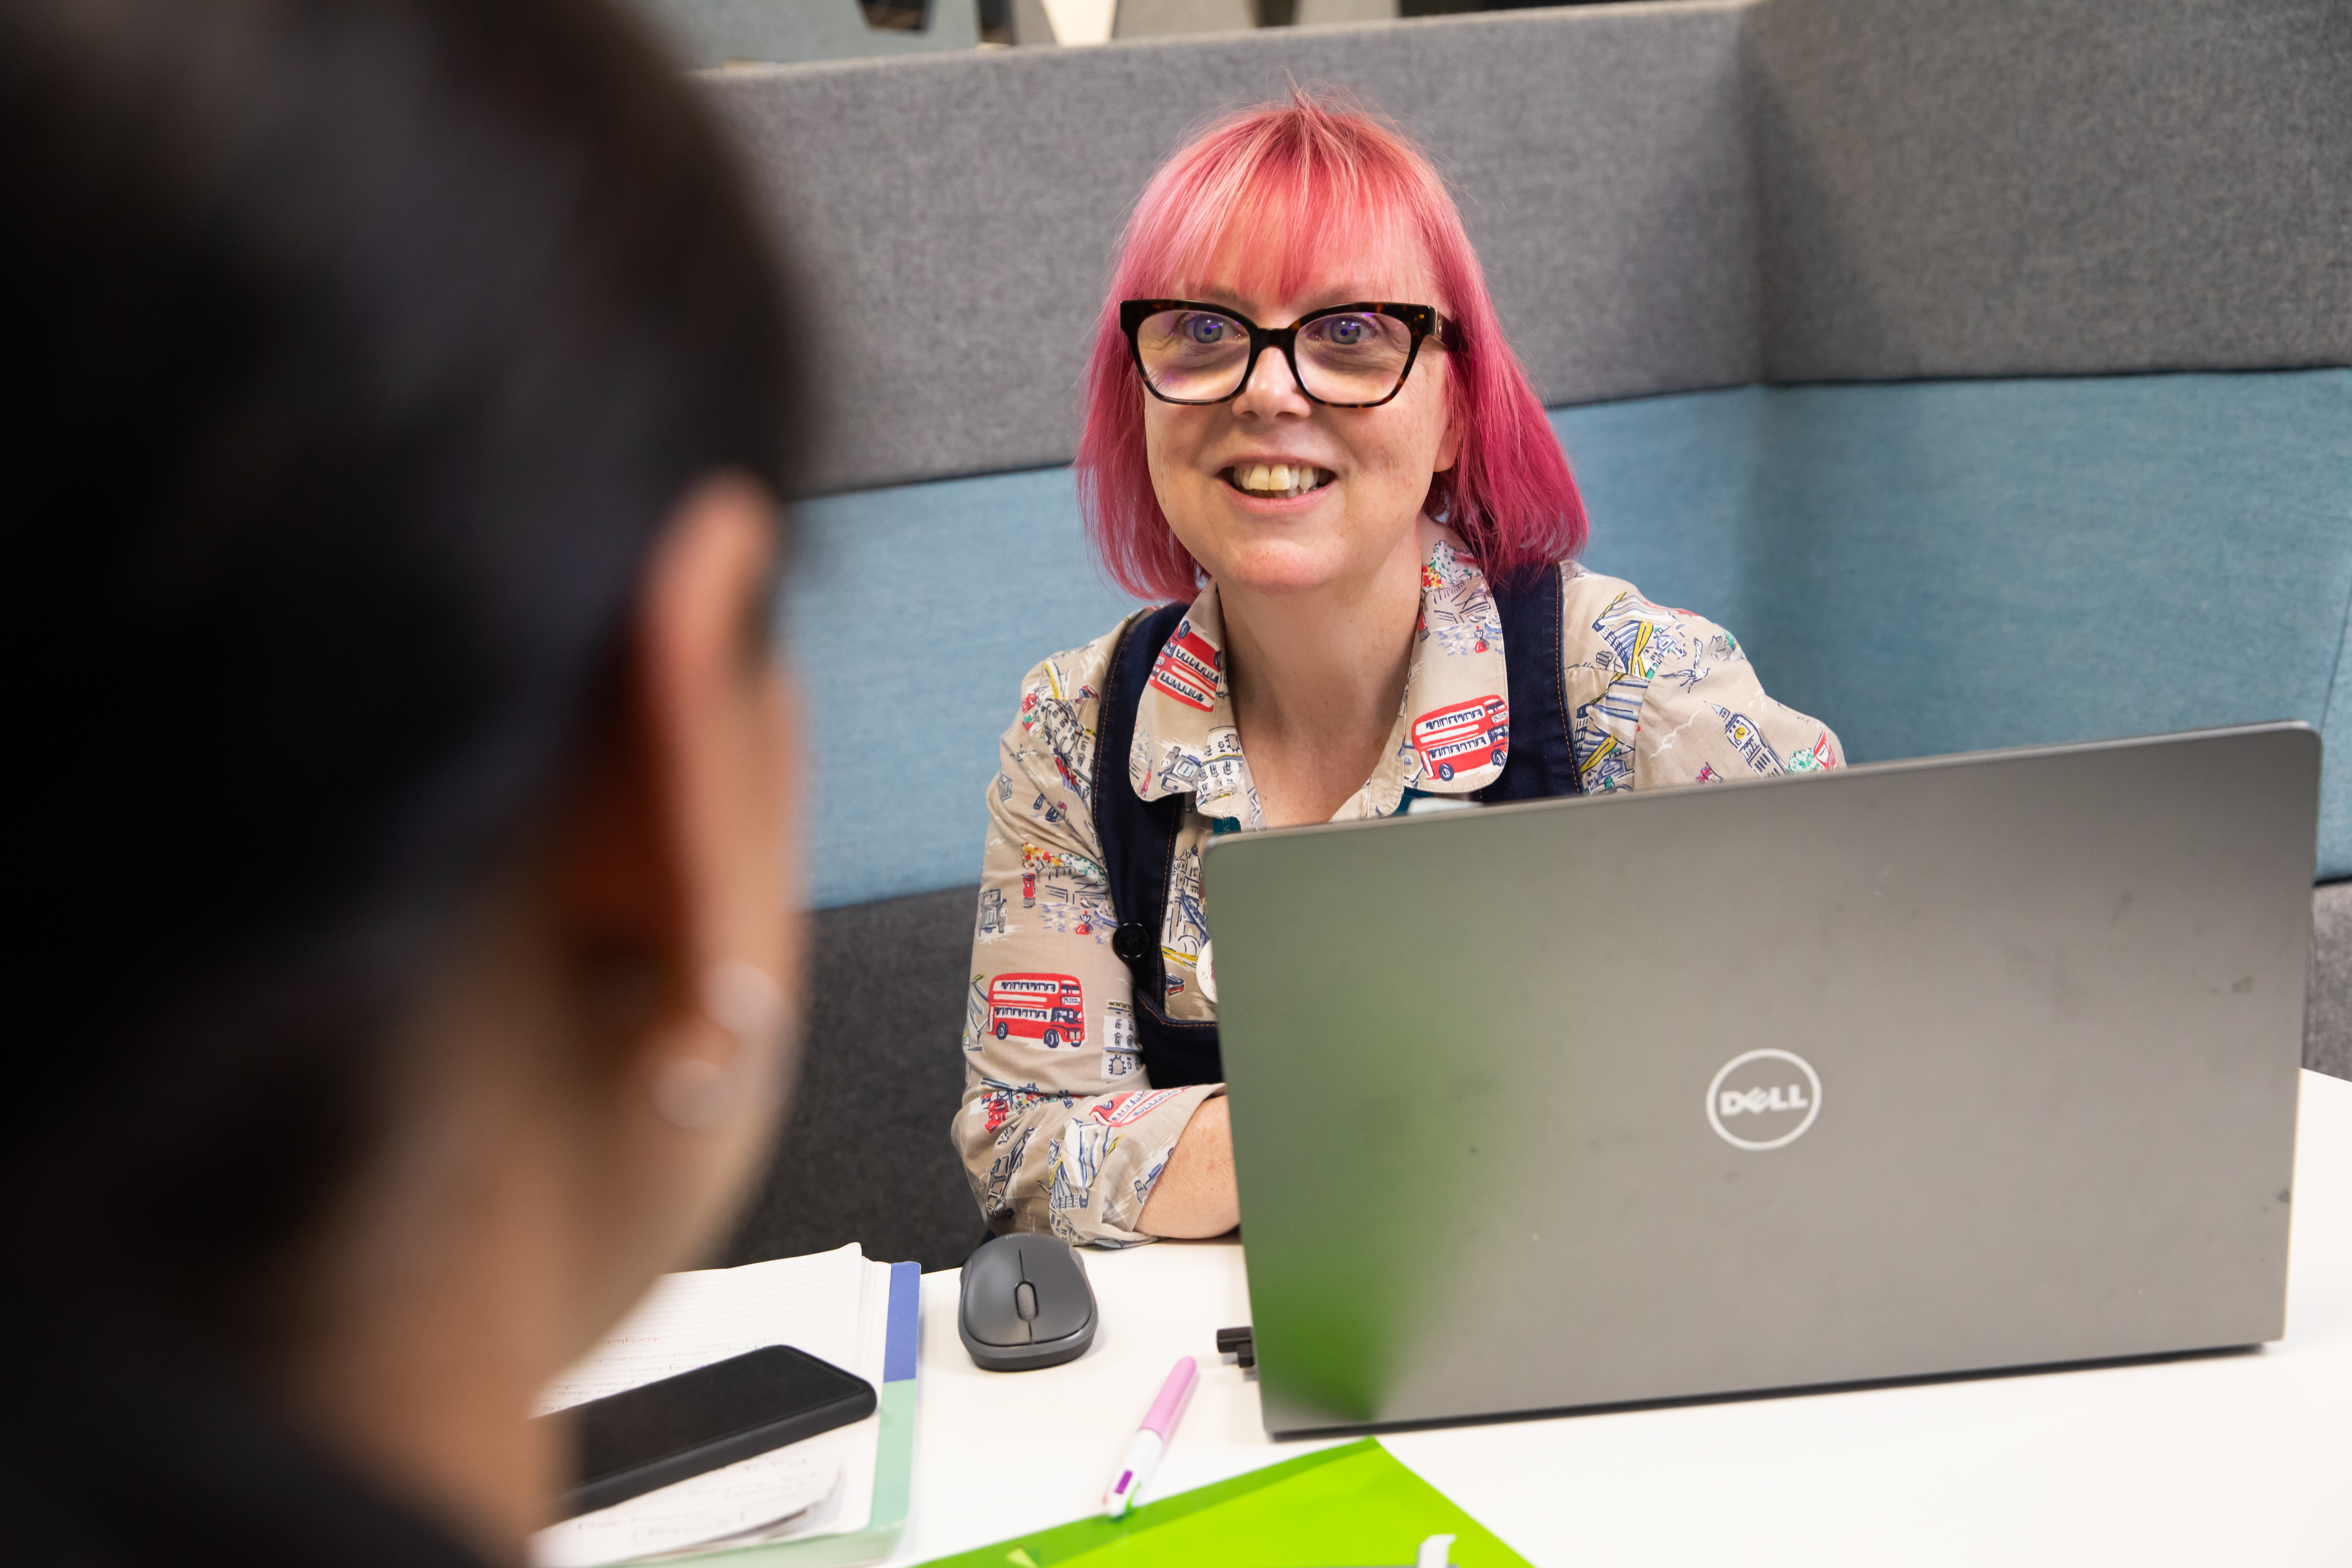 Colleague with pink hair on laptop, sat facing another colleague who is blurred in foreground